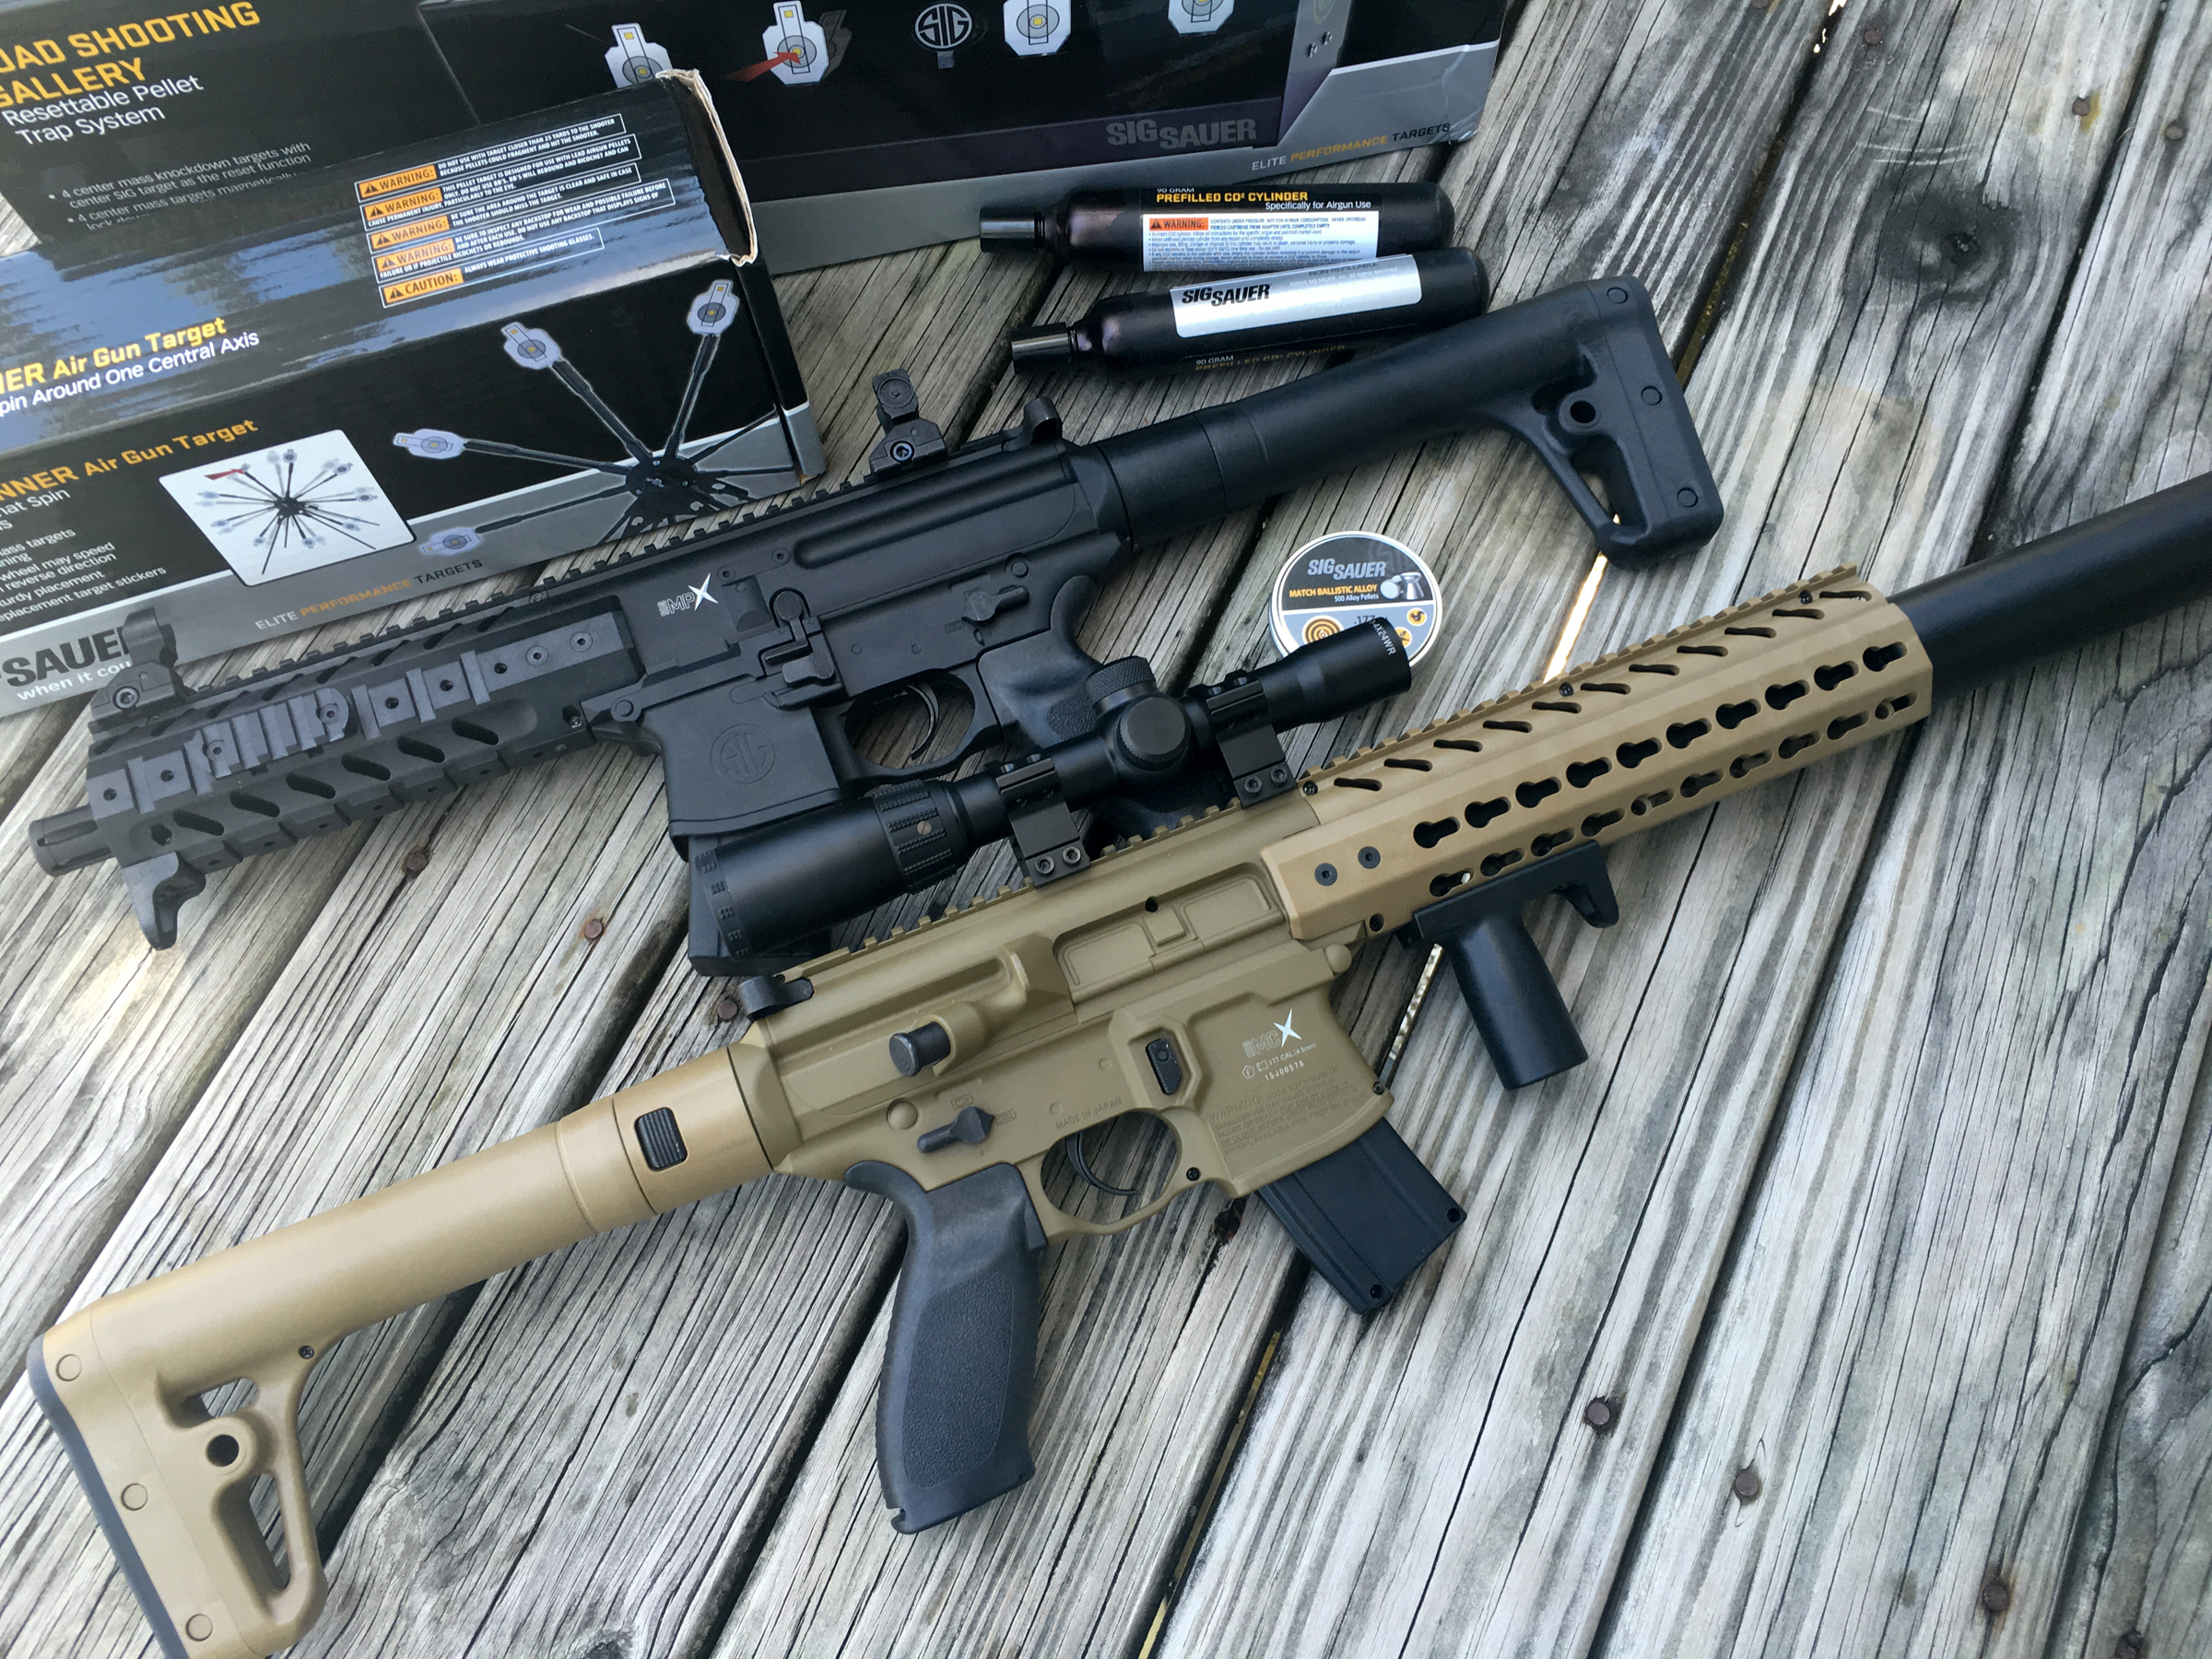 The Sig Sauer MPX Airgun (top) and MCX.